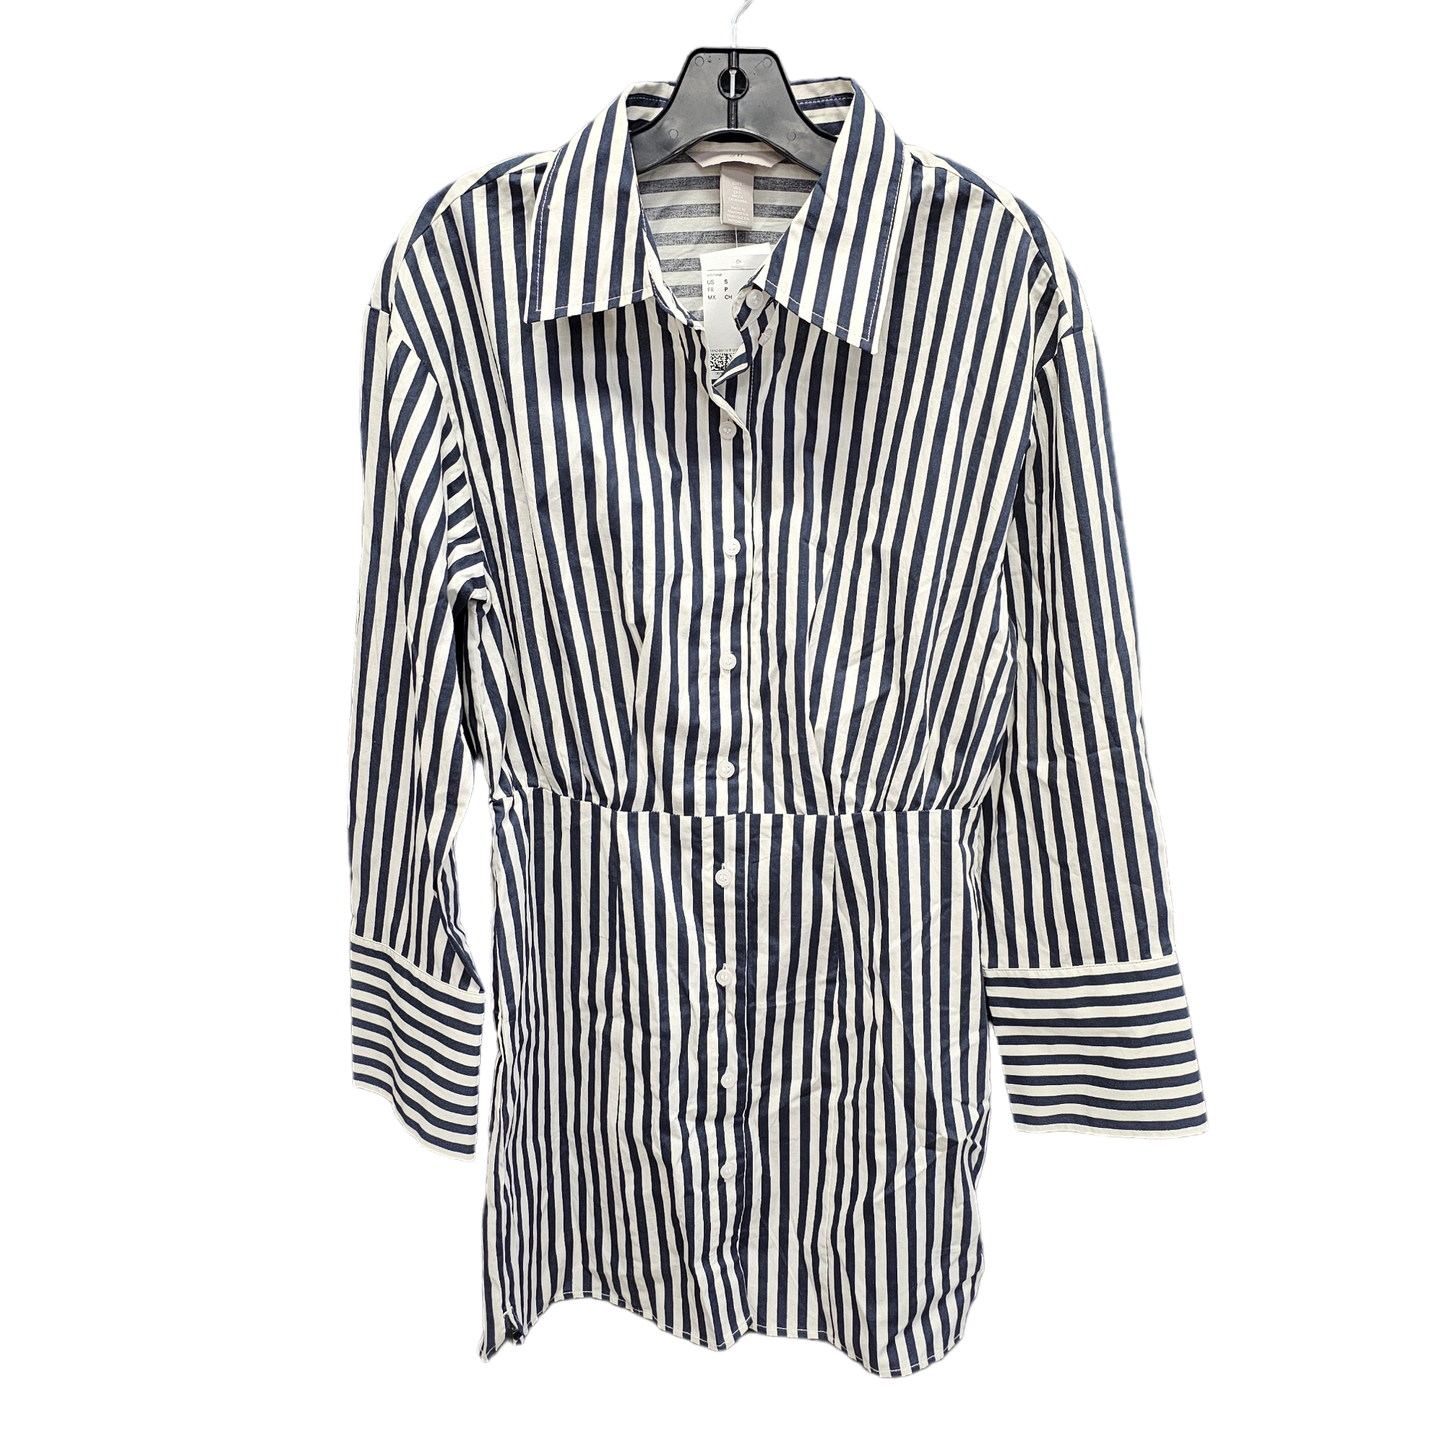 Striped Pattern Dress Casual Short H&m, Size S